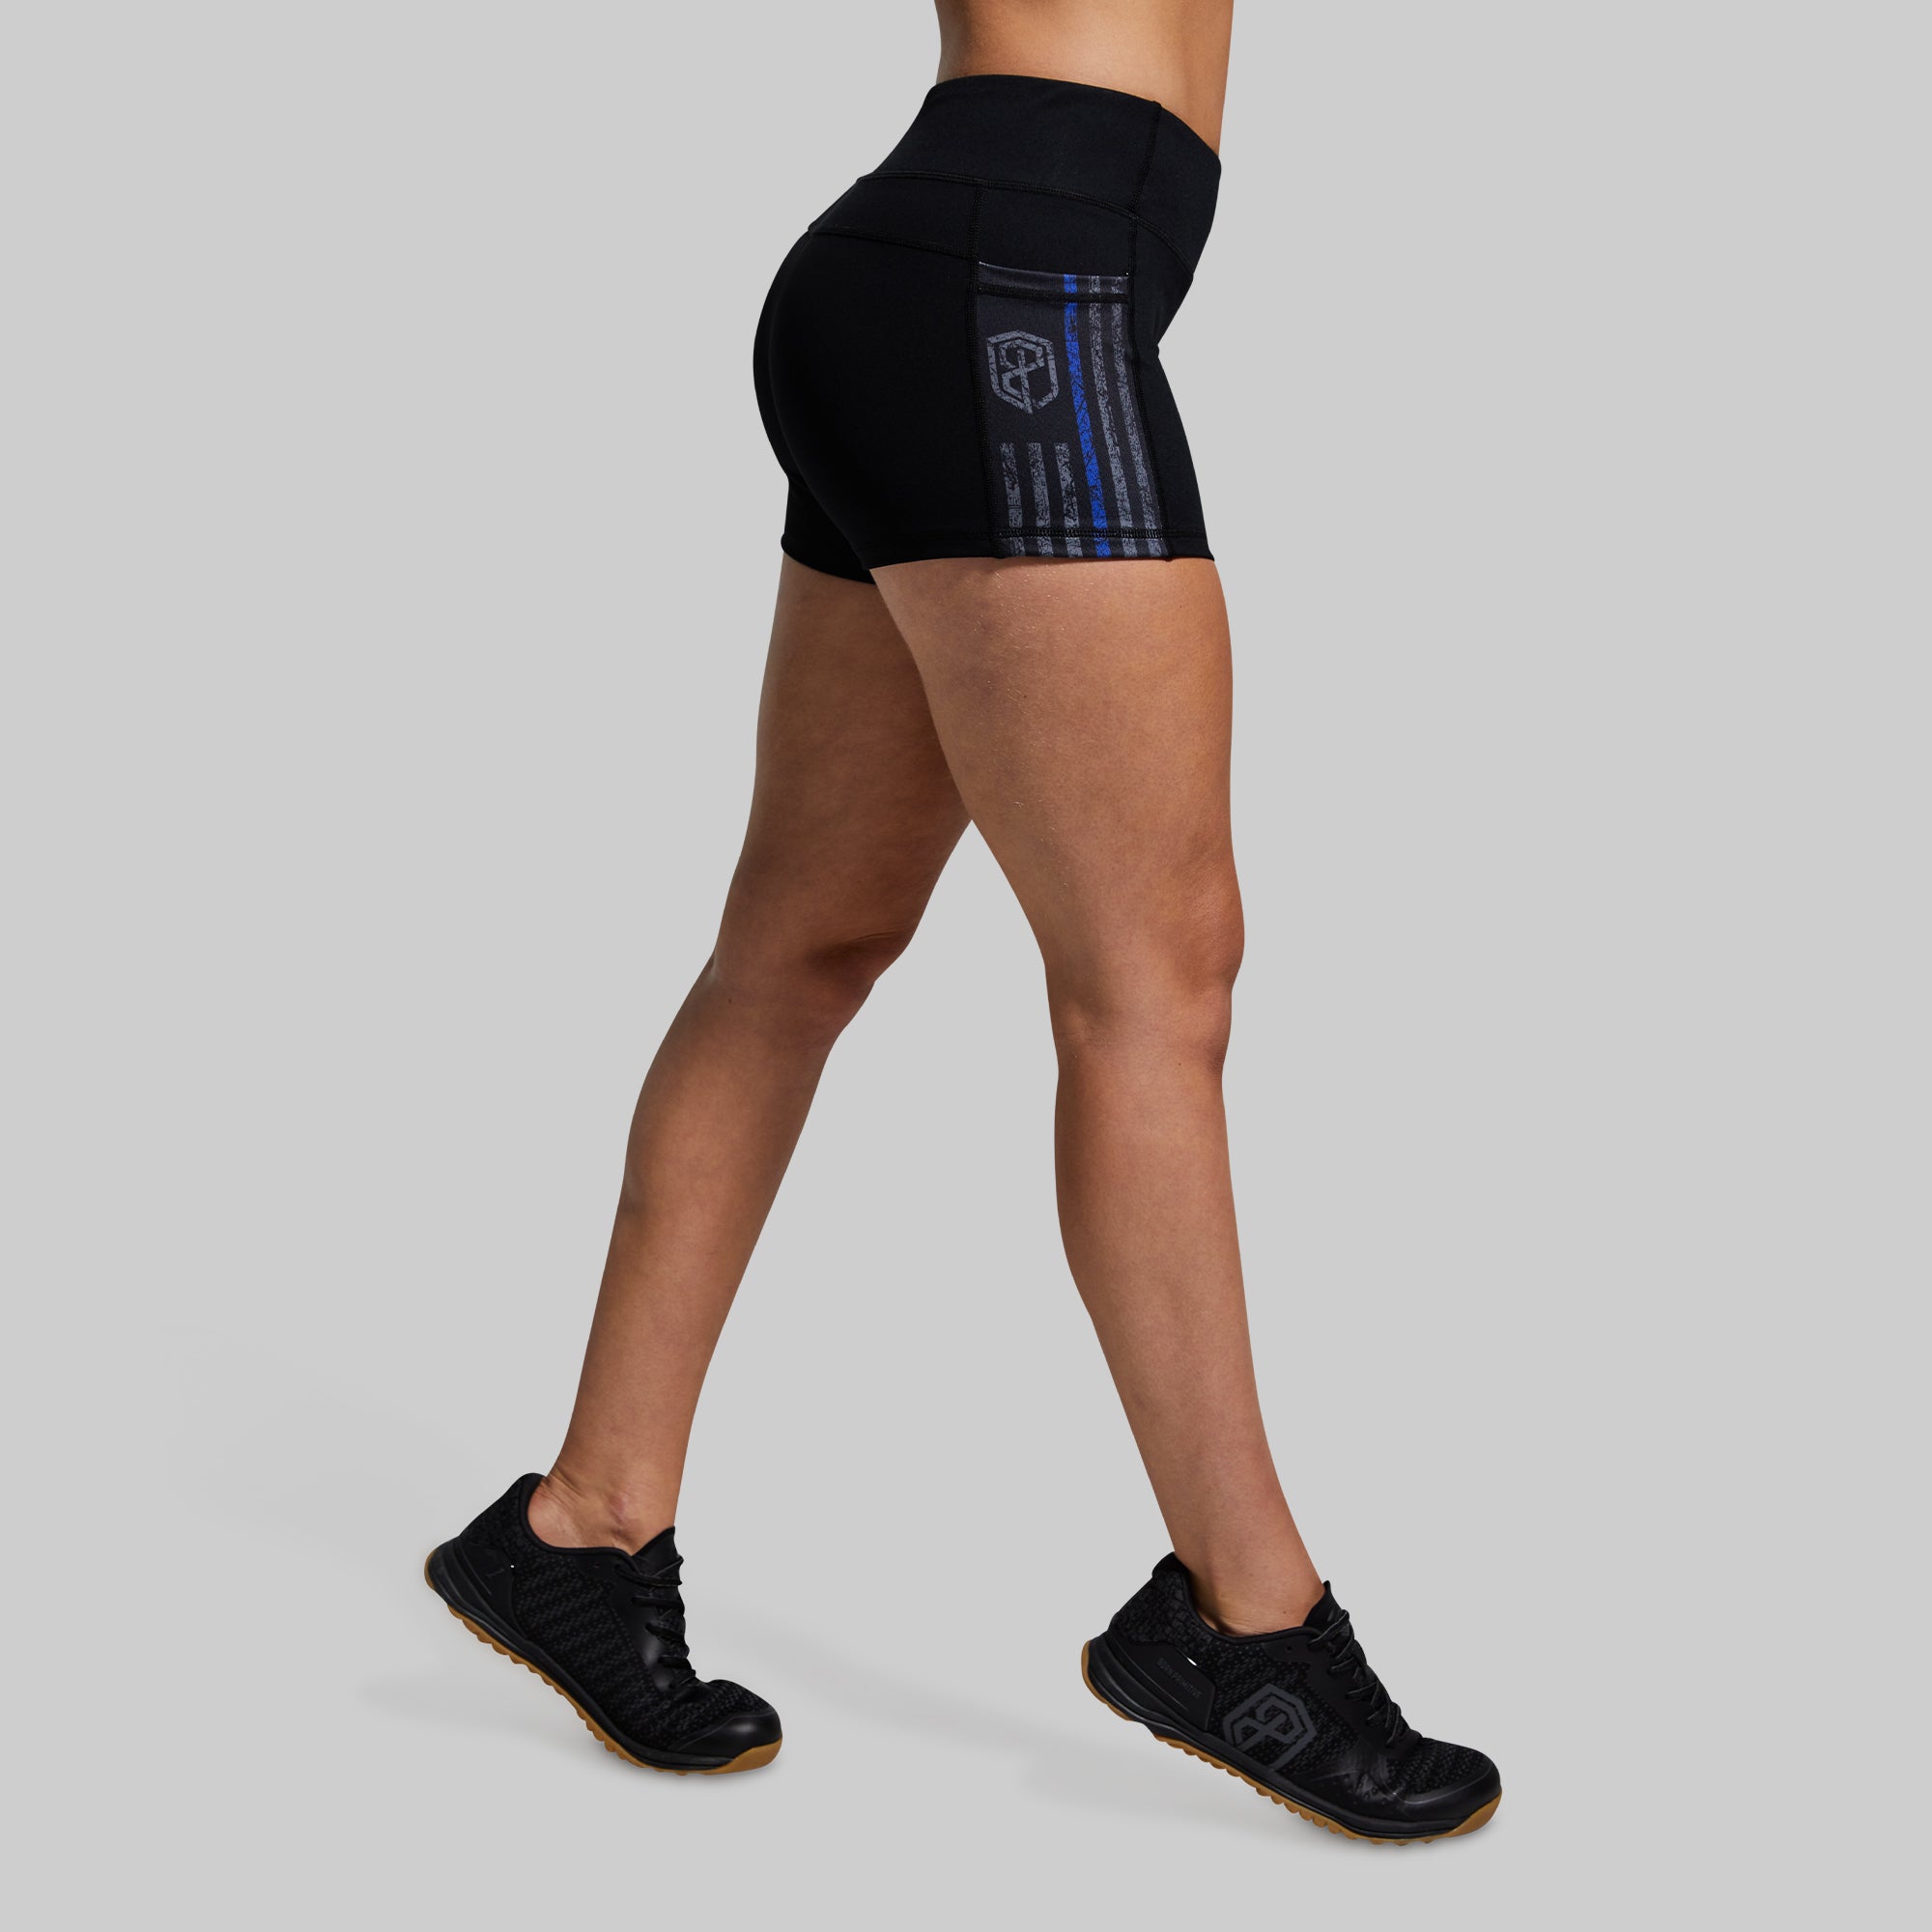 Born Primitive Double Take Booty Shorts – Athletic Shorts for Women – Form  Fitting Spandex Gym, Yoga, Running, Volleyball or Workout Shorts – Thin  Blue Line Police Edition, Extra Small at